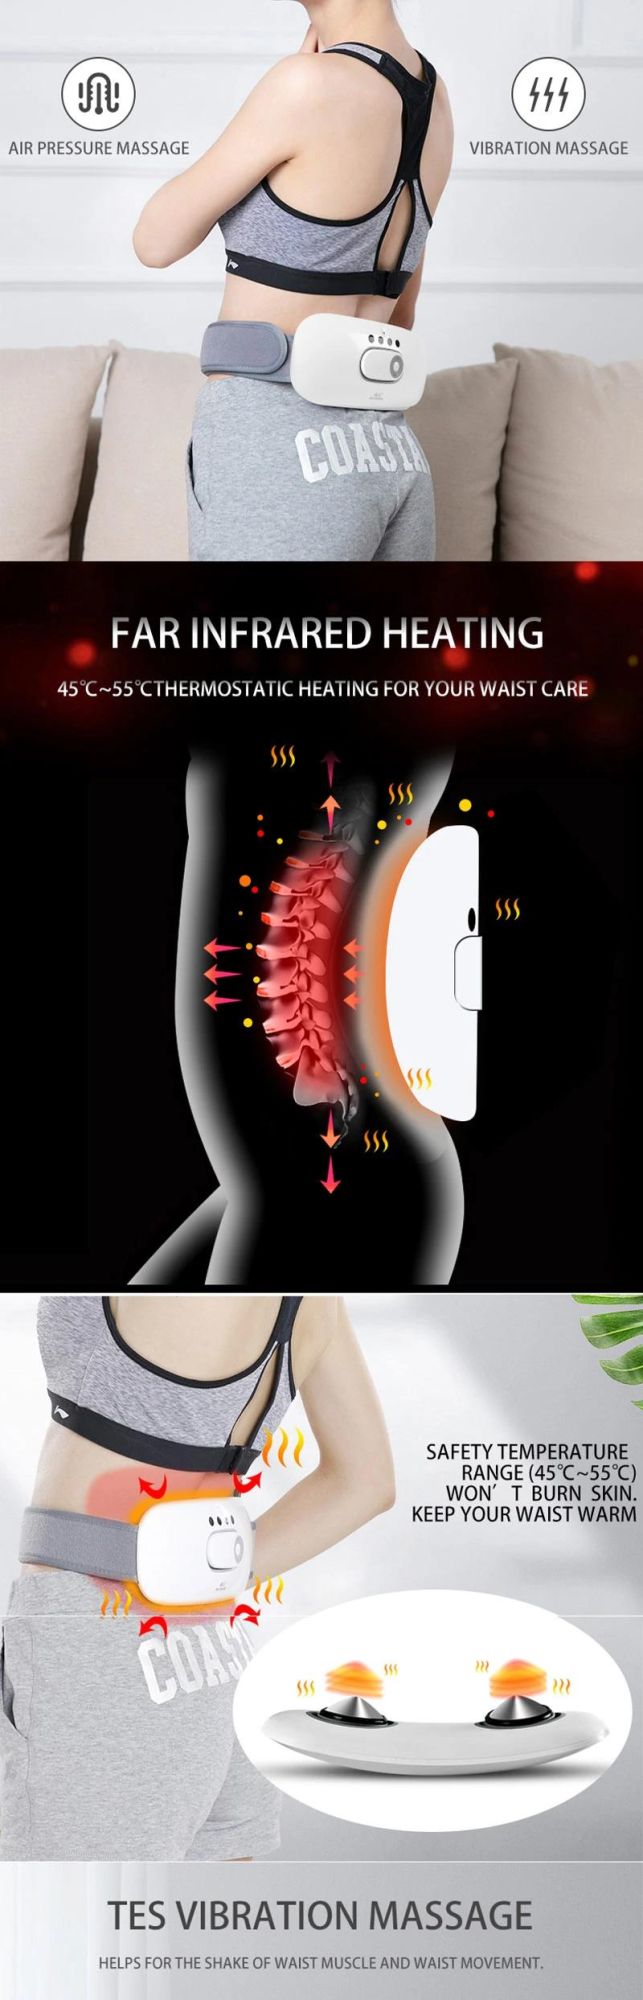 Hezheng 2020 Wholesale Electric Heating Back Waist Massager for Health Care